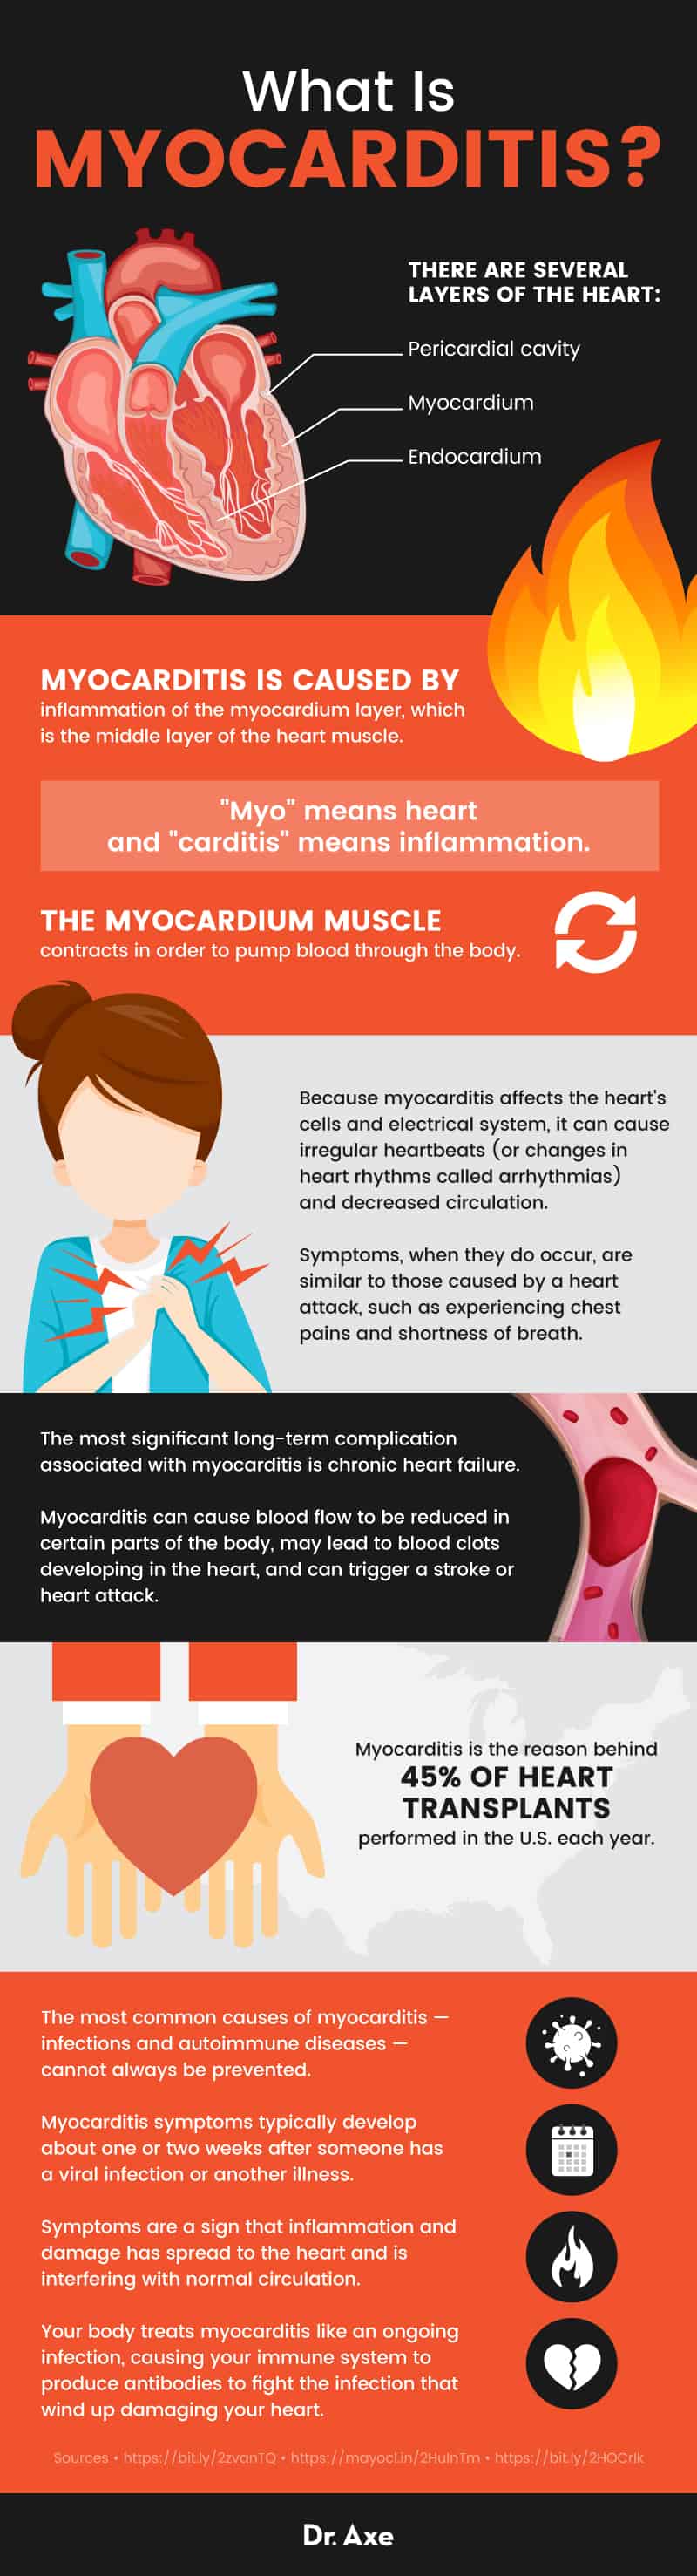 What is myocarditis? - Dr. Axe